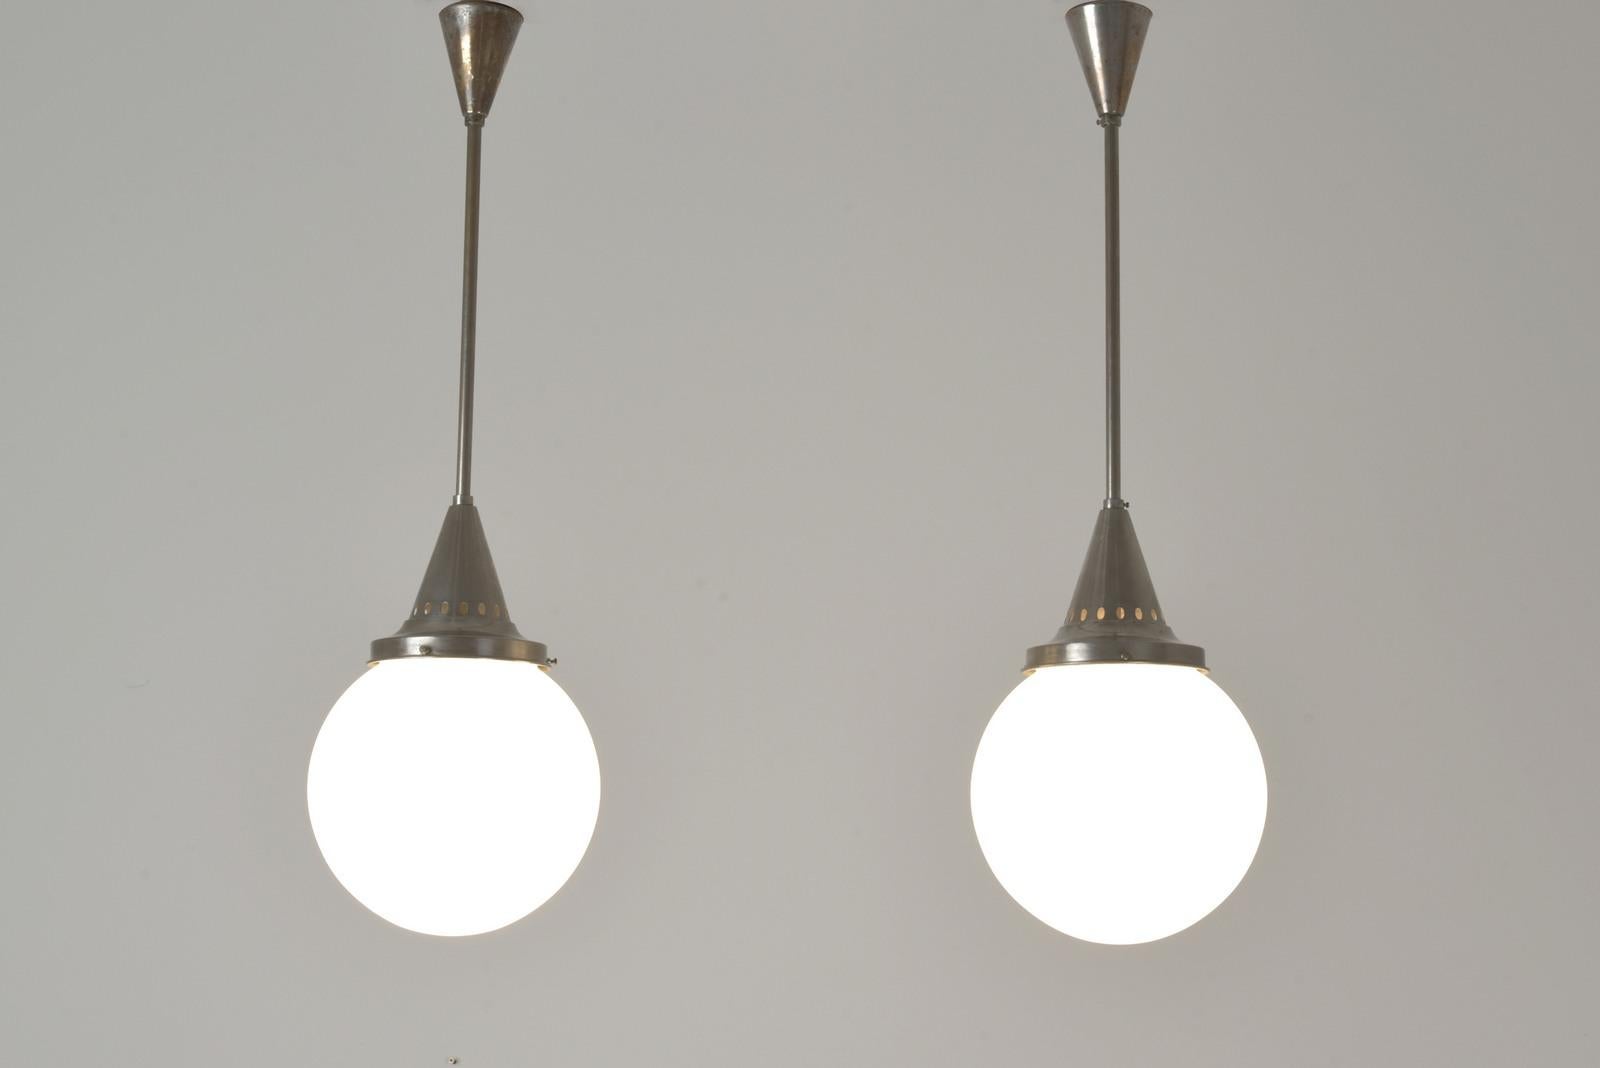 Dimensions: H 83 cm W 23 cm D 23 cm

Material: Nickel-plated brass, molded blown frosted glass, one E 27 bulb each

Condition: Good original condition

Special features: with signs of use. We are offering this beautifully shaped pair of ART-DECO